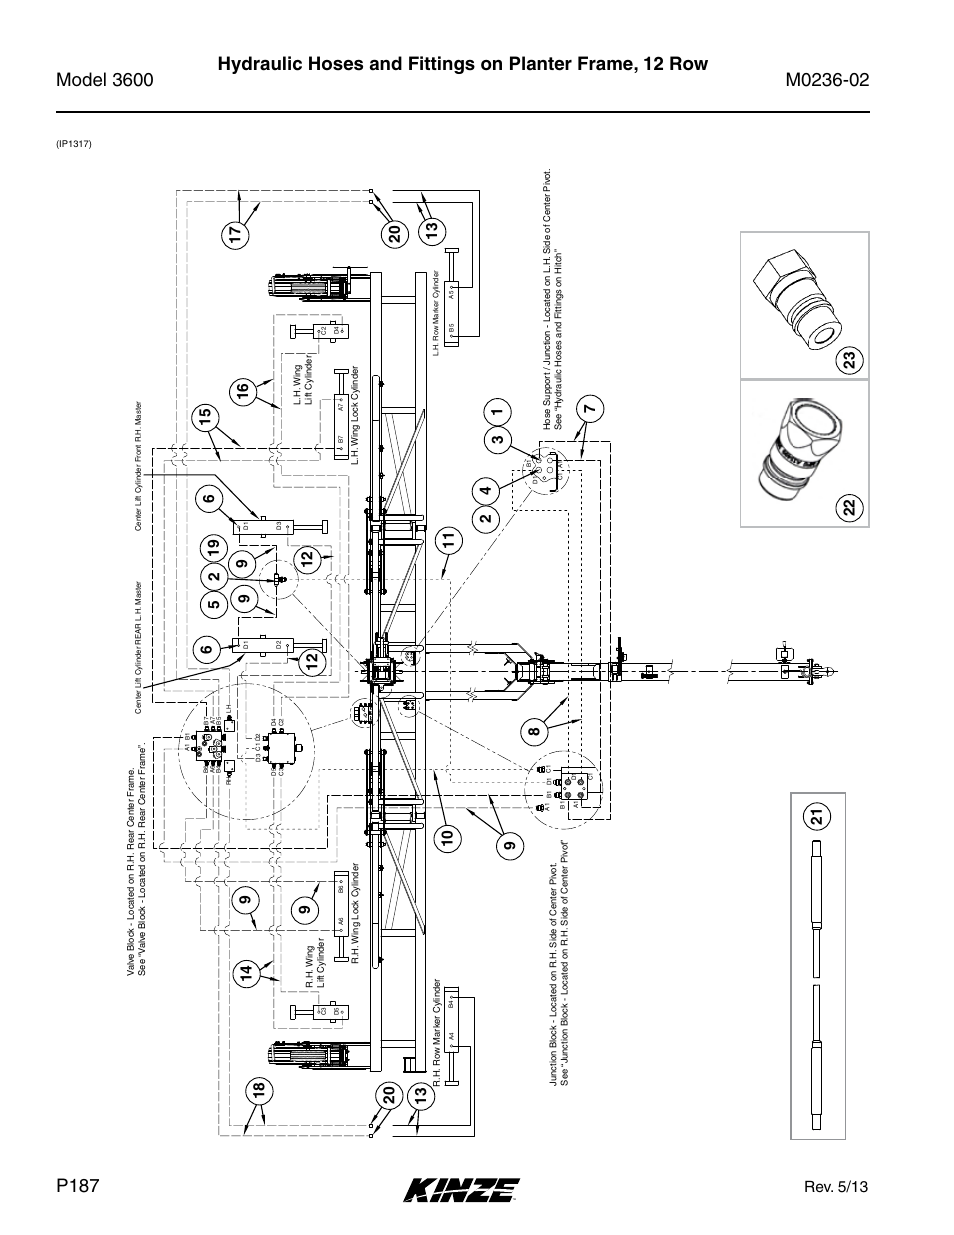 Kinze 3600 Lift and Rotate Planter Rev. 5/14 User Manual | Page 190 / 302